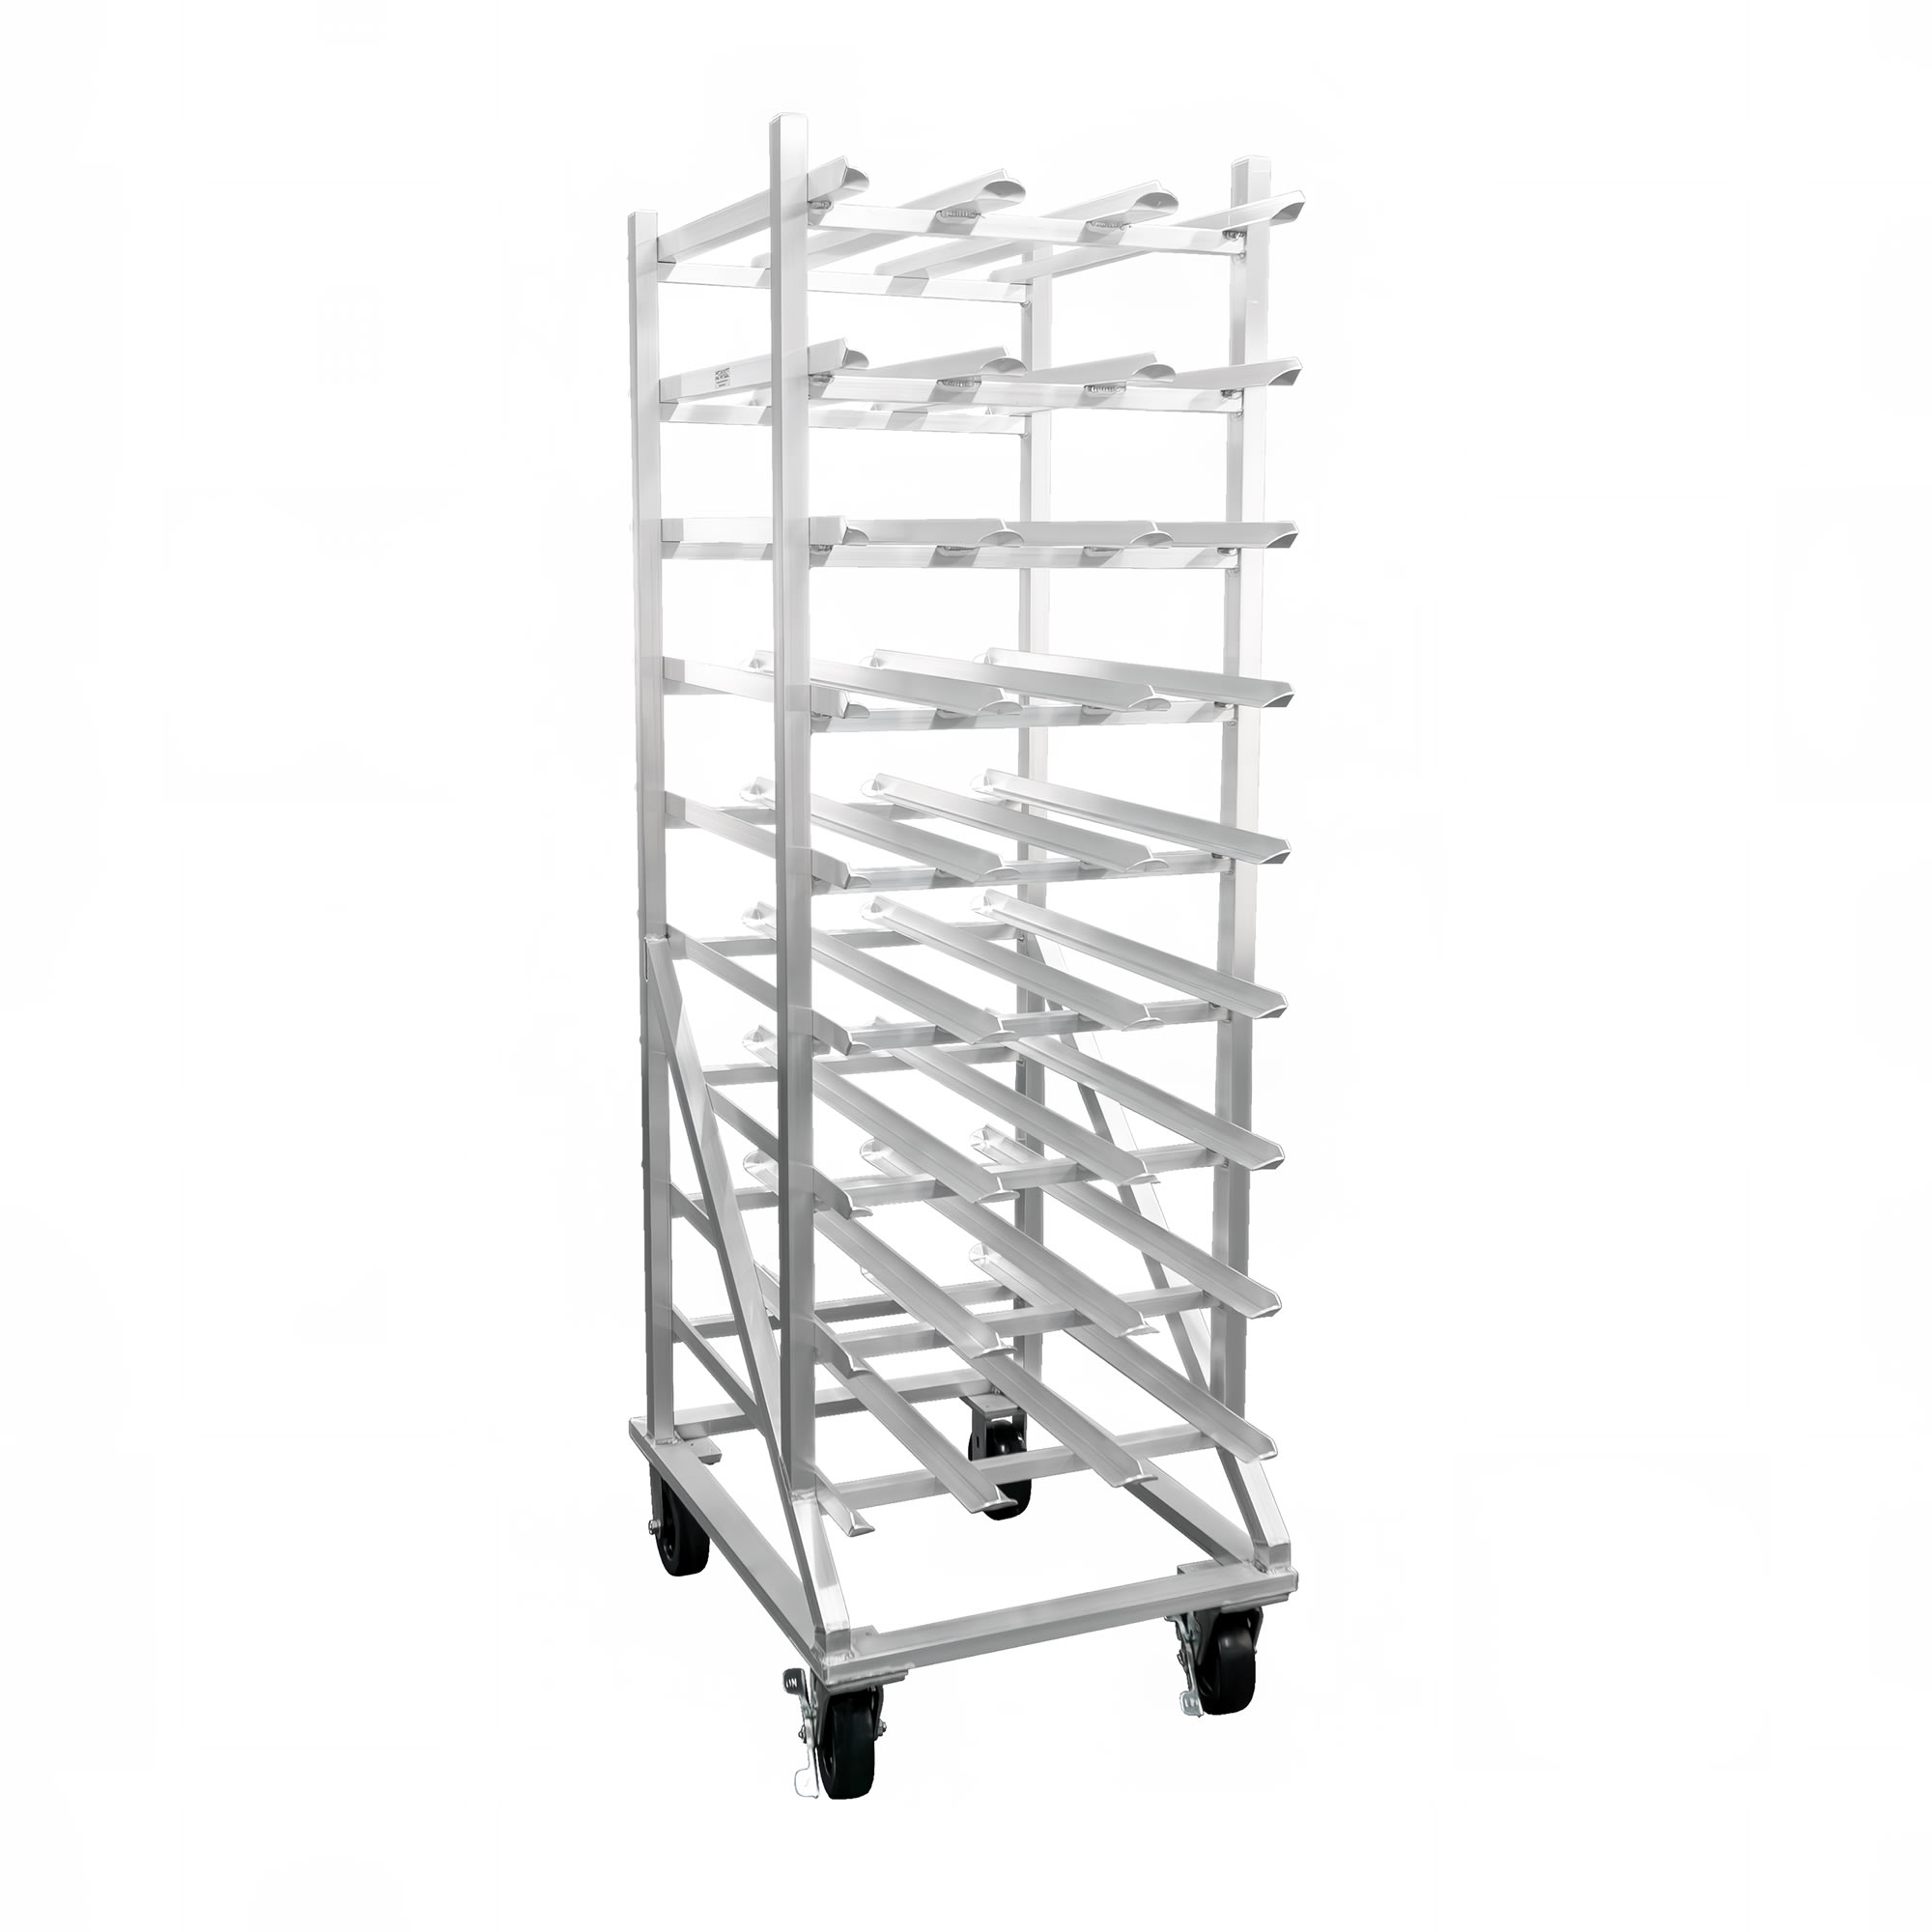 New Age Industrial Aluminum Mobile Boot Drying Racks - Bunzl Processor  Division